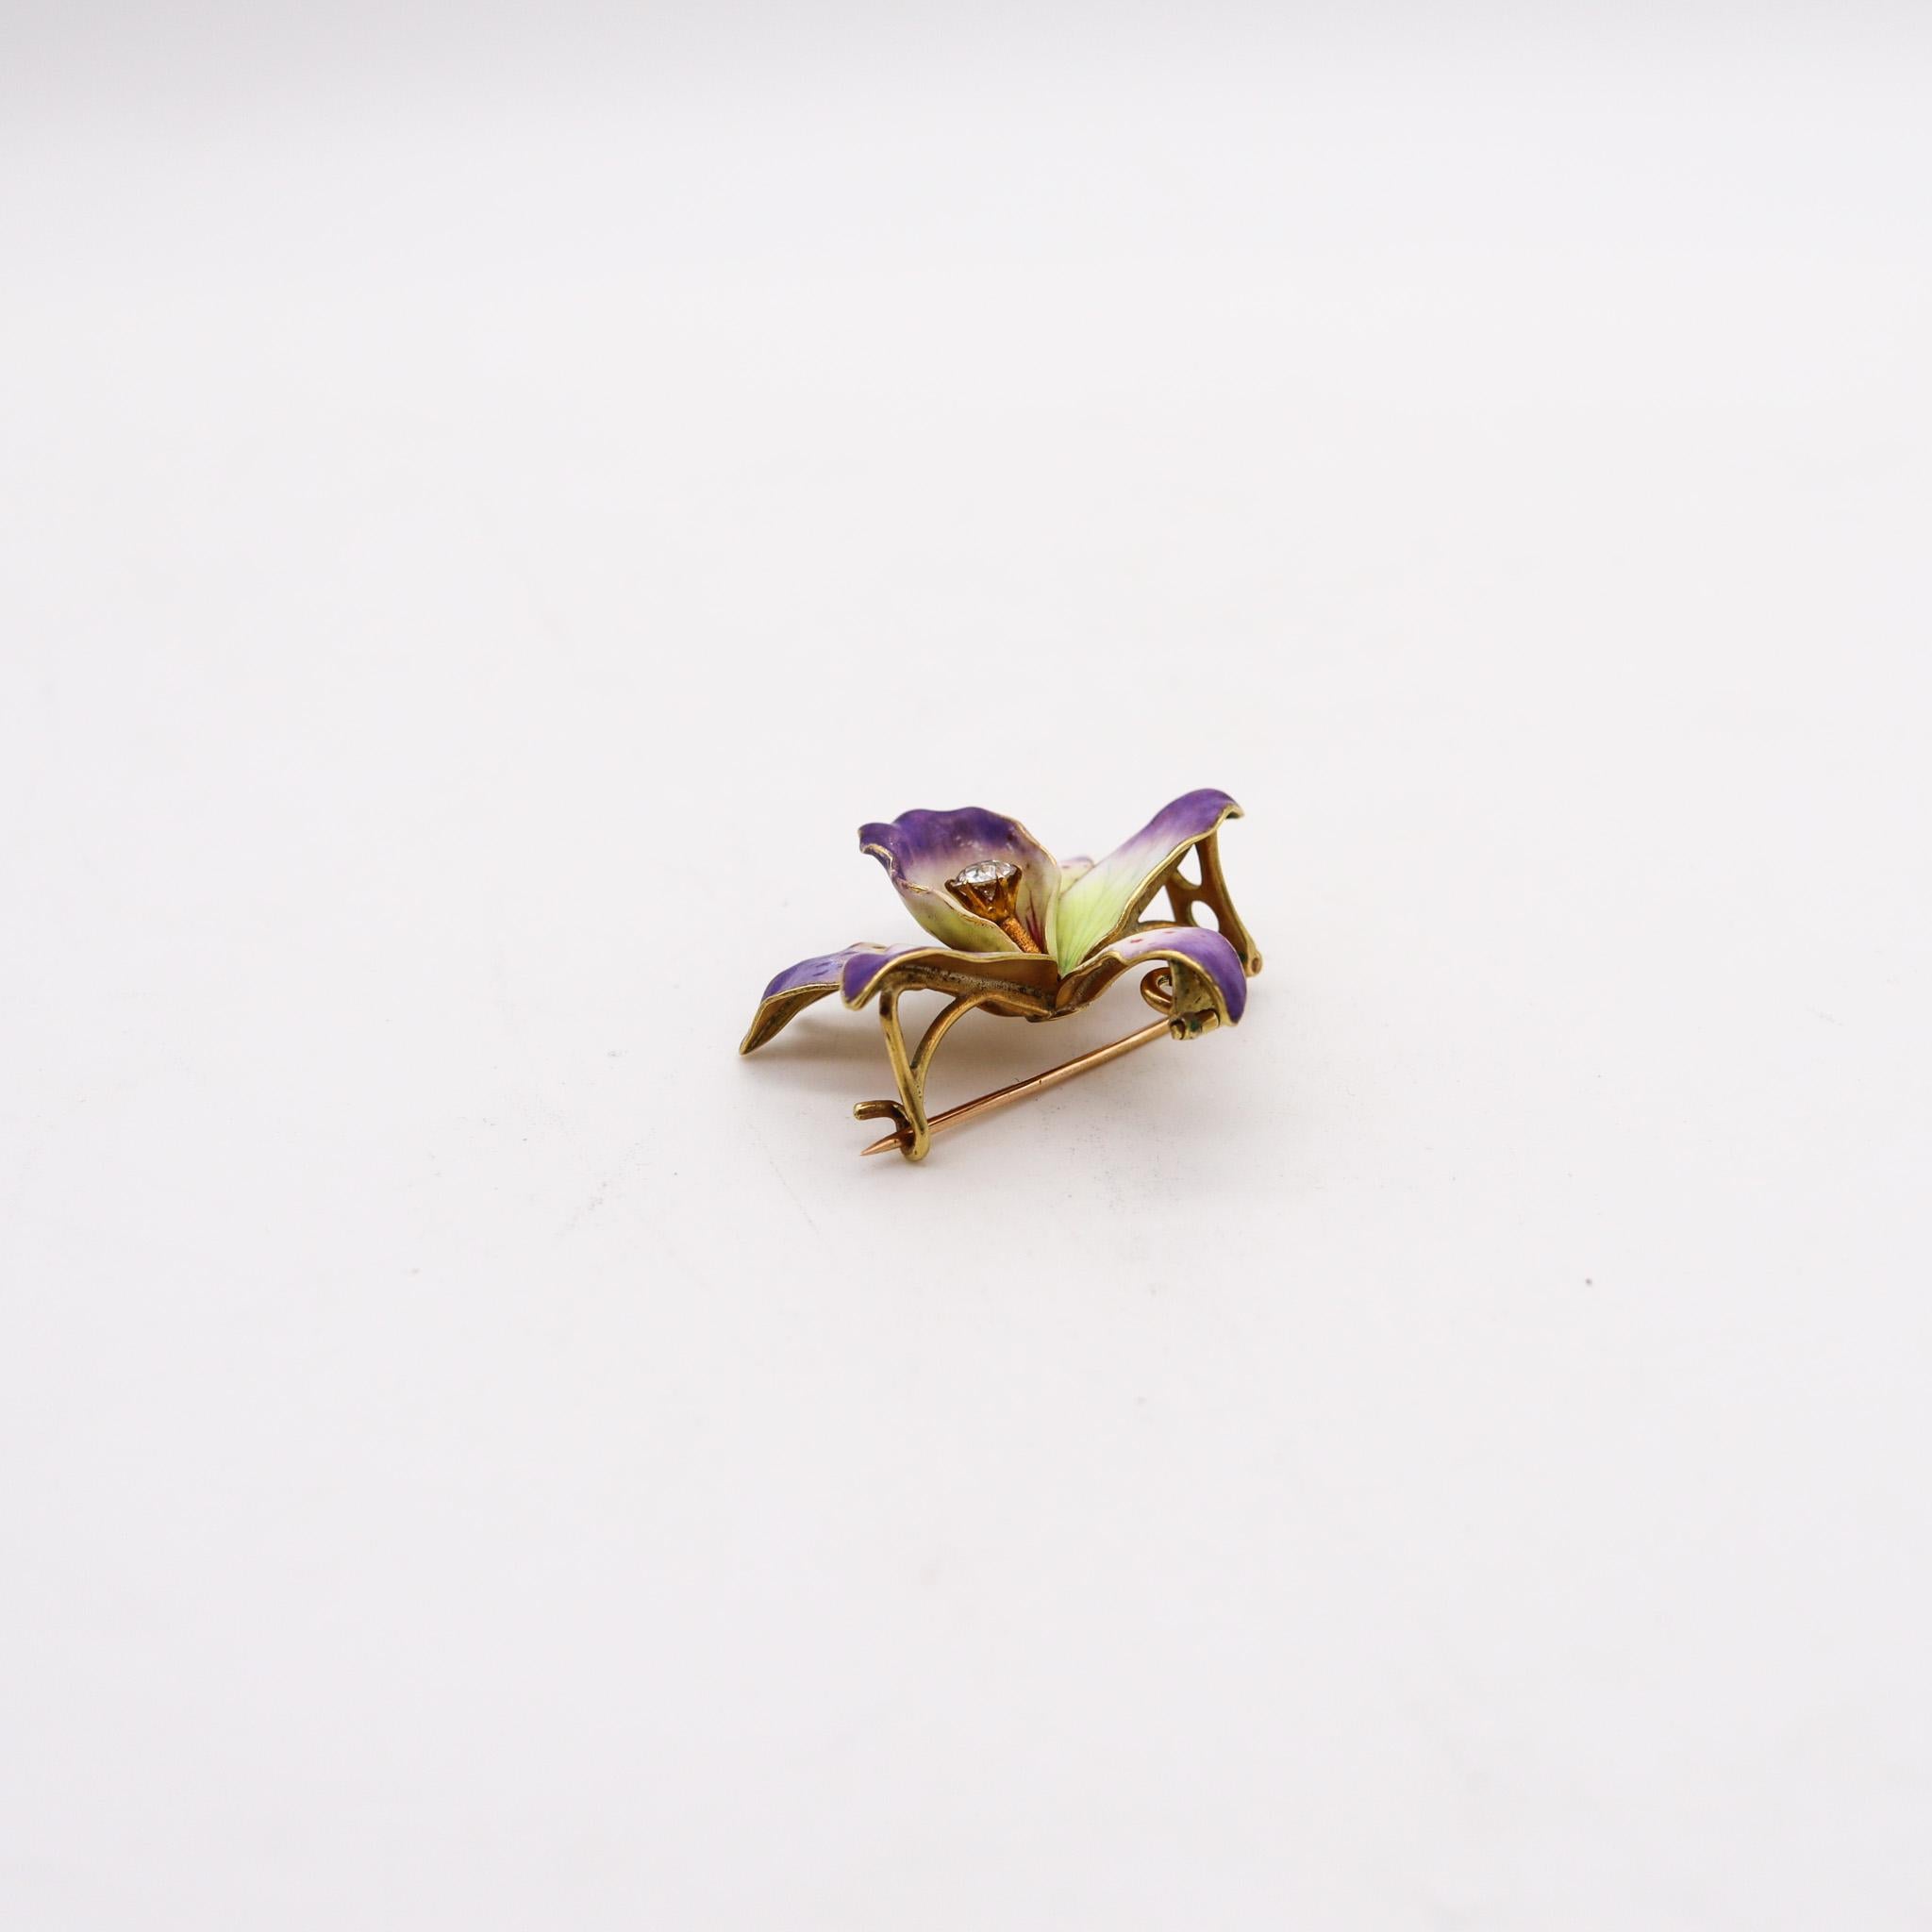 Edwardian art nouveau enamel Orchid pendant-brooch.

Really fantastic three-dimensional piece, created in America during the Edwardian and the Art Nouveau periods, back in the 1900-1910. This rare beautiful pendant brooch is very unusual due the